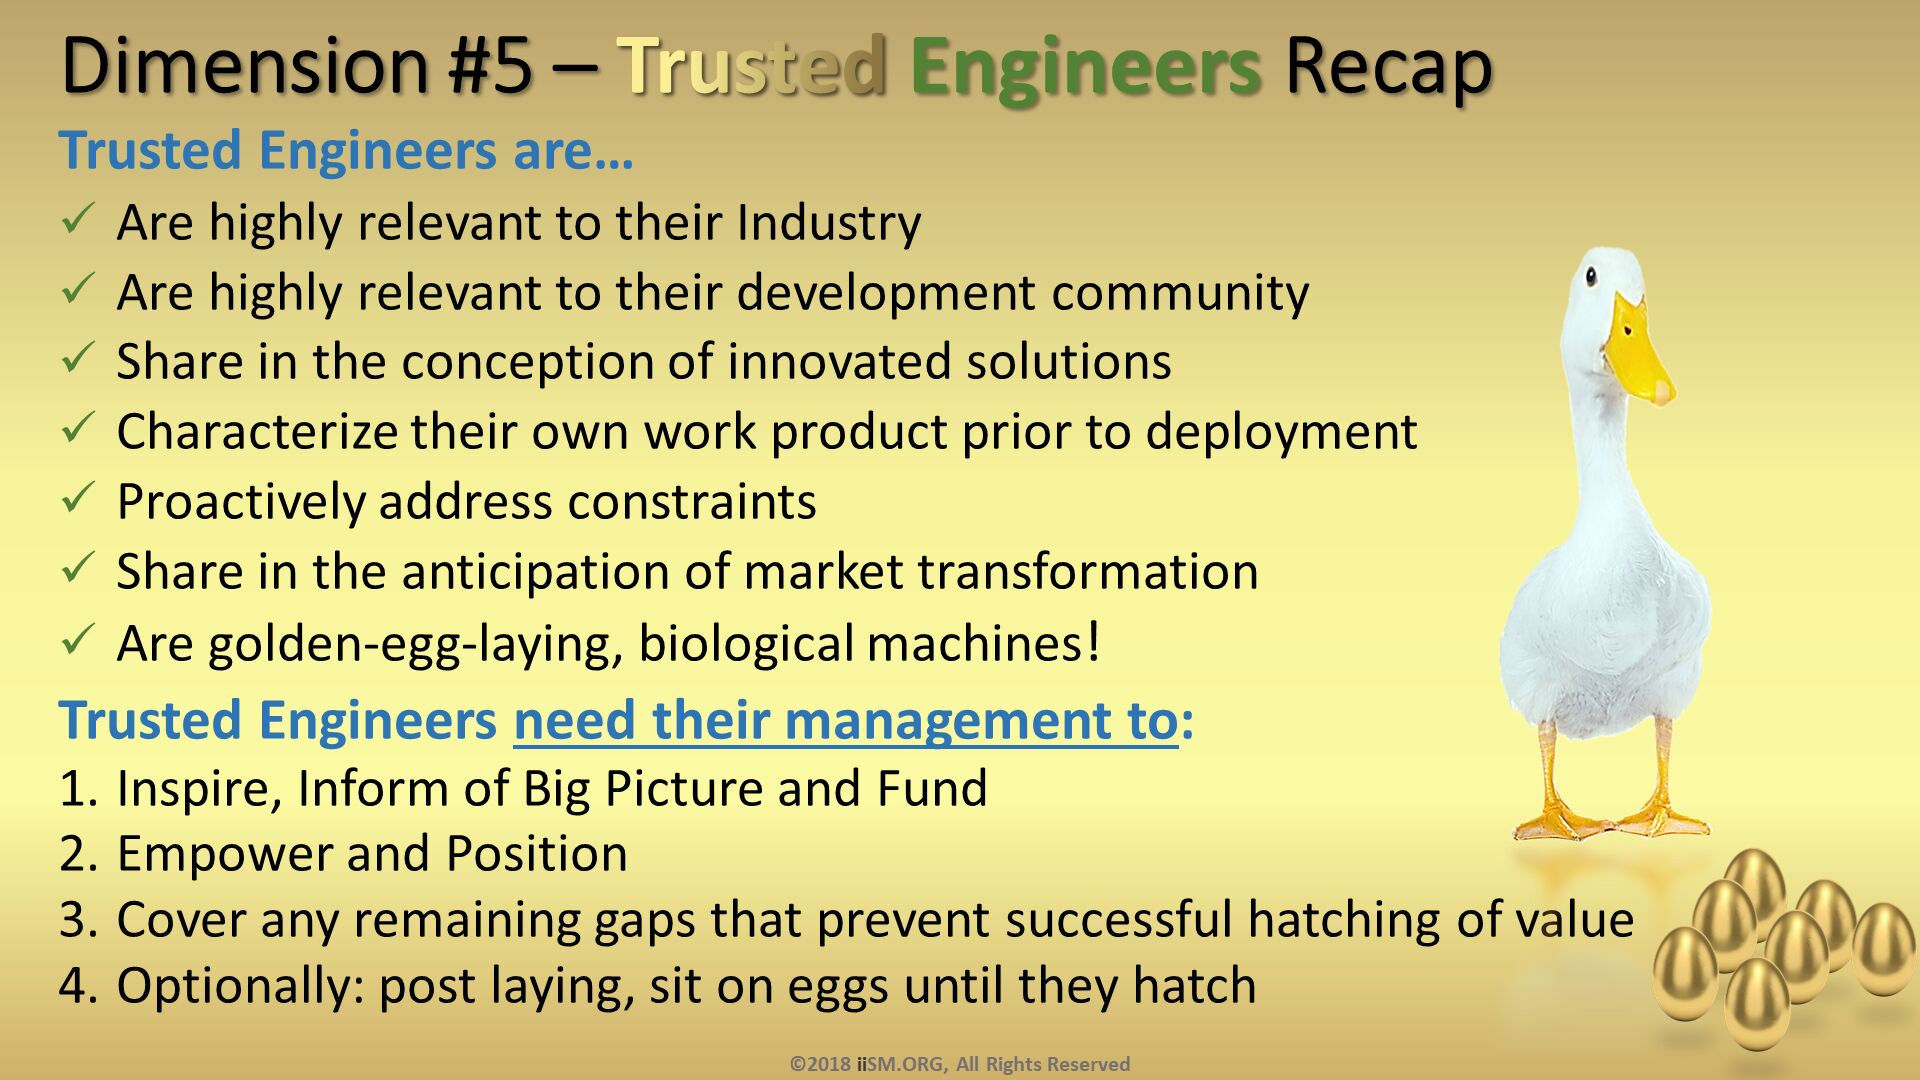 Dimension #5 – Trusted Engineers Recap. Trusted Engineers are…
Are highly relevant to their Industry
Are highly relevant to their development community
Share in the conception of innovated solutions
Characterize their own work product prior to deployment
Proactively address constraints
Share in the anticipation of market transformation
Are golden-egg-laying, biological machines!
Trusted Engineers need their management to:
Inspire, Inform of Big Picture and Fund
Empower and Position
Cover any remaining gaps that prevent successful hatching of value
Optionally: post laying, sit on eggs until they hatch


. ©2018 iiSM.ORG, All Rights Reserved. 